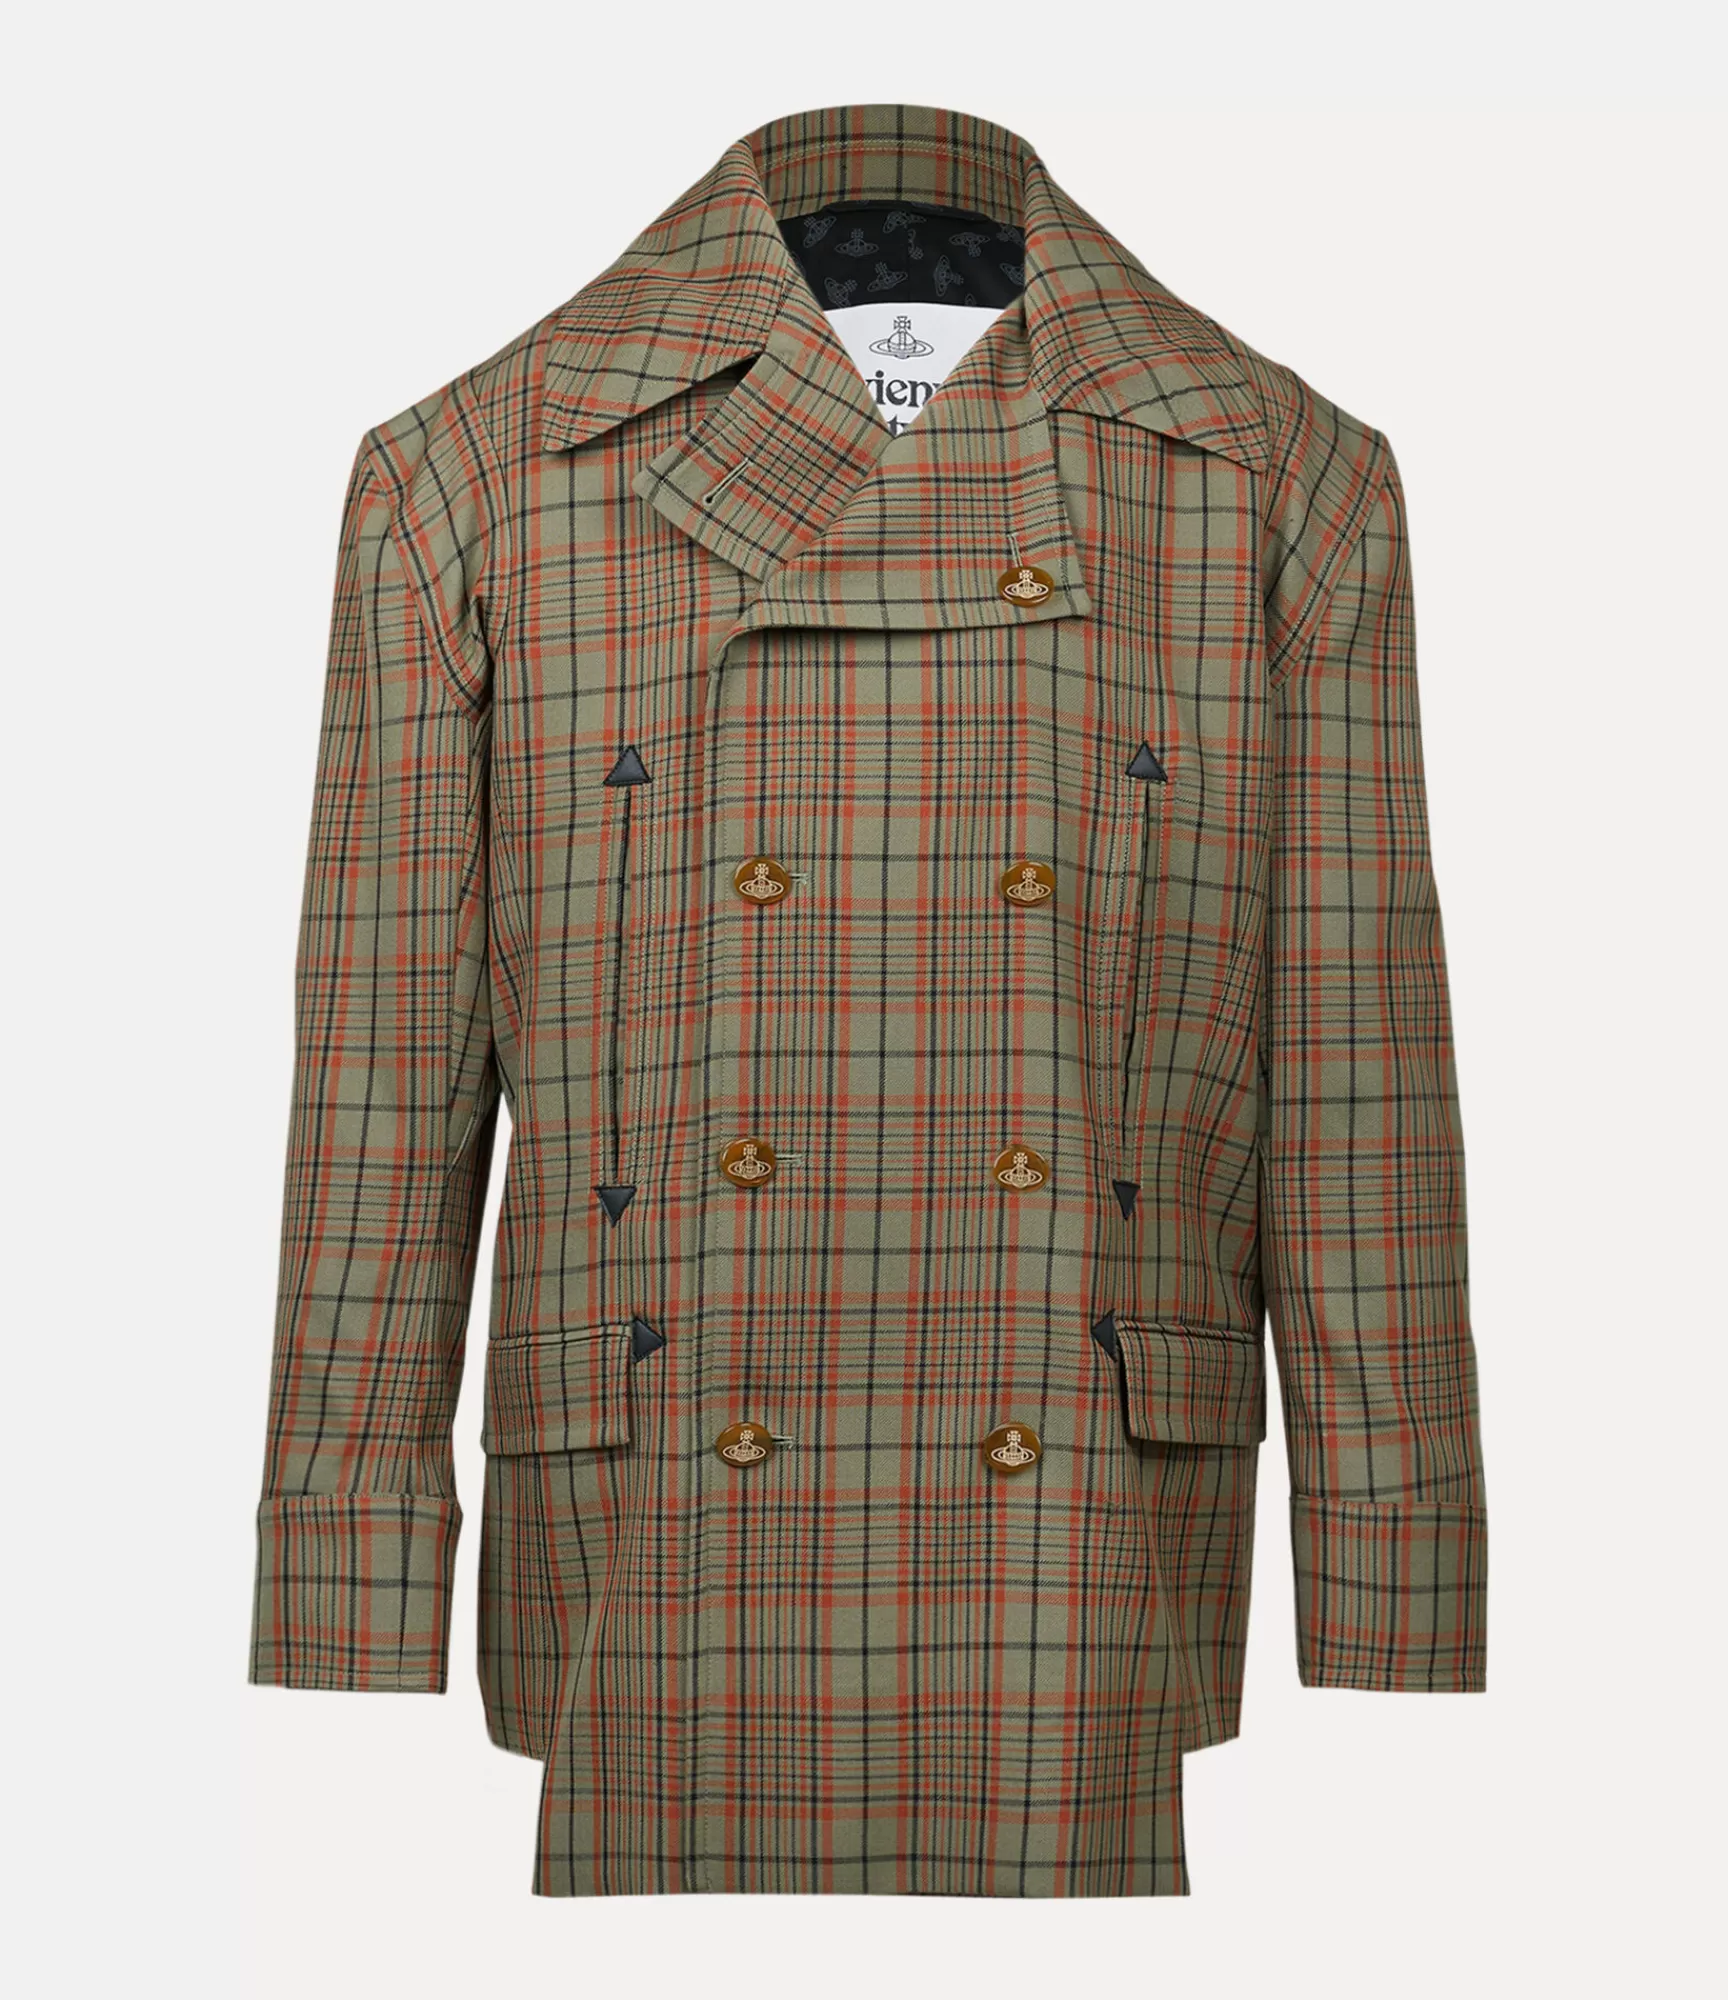 Vivienne Westwood Coats and Jackets*STRIPPED PEACOAT Green And Orange Check